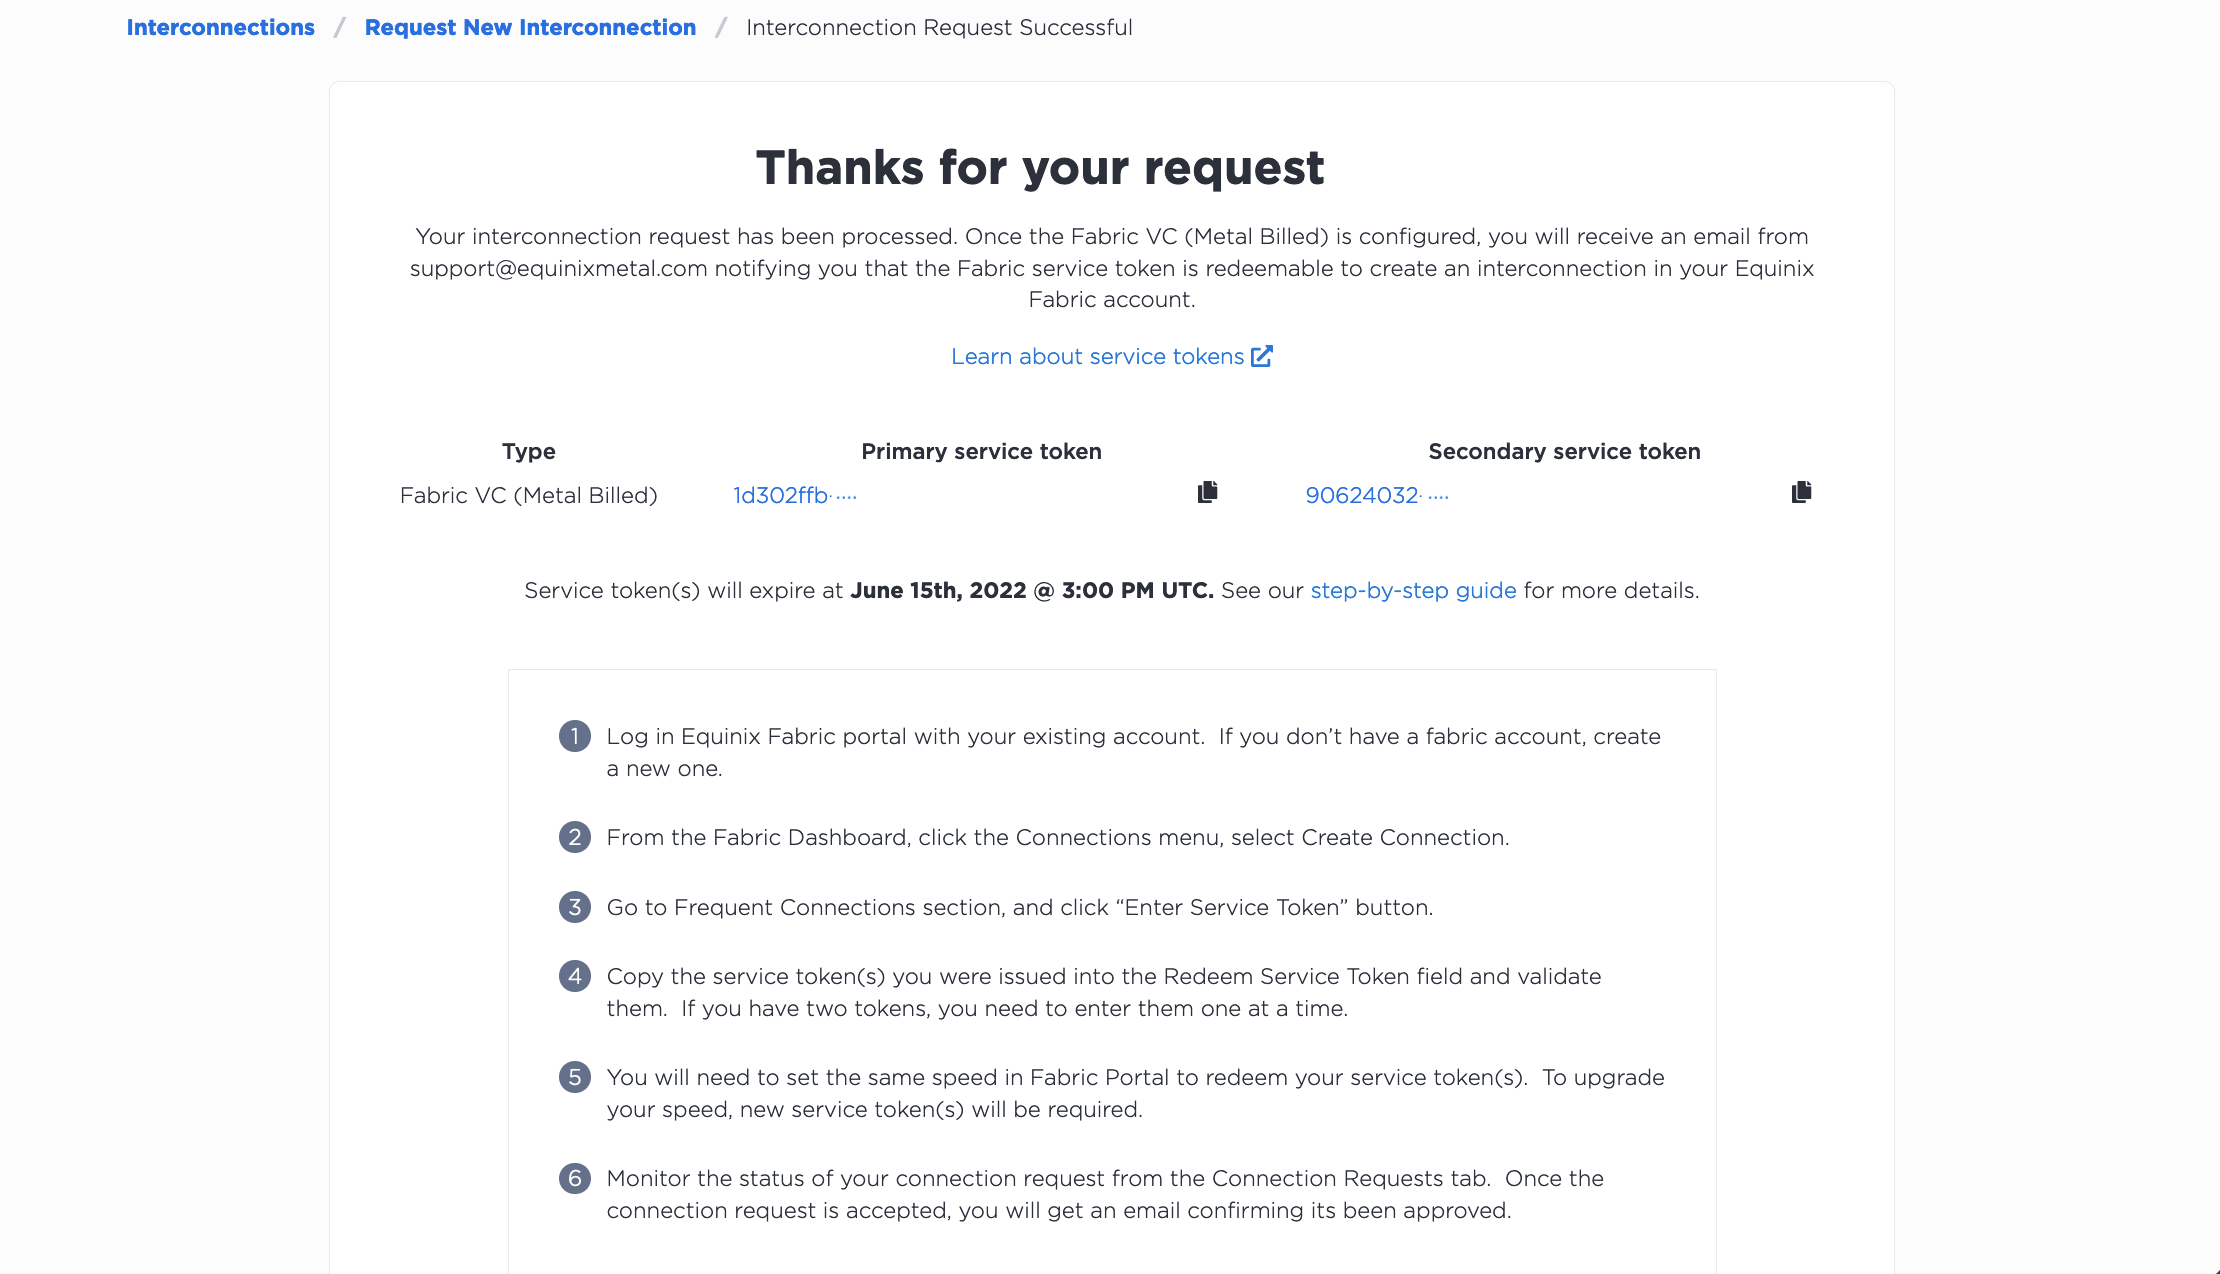 A Successful Connection Request Page